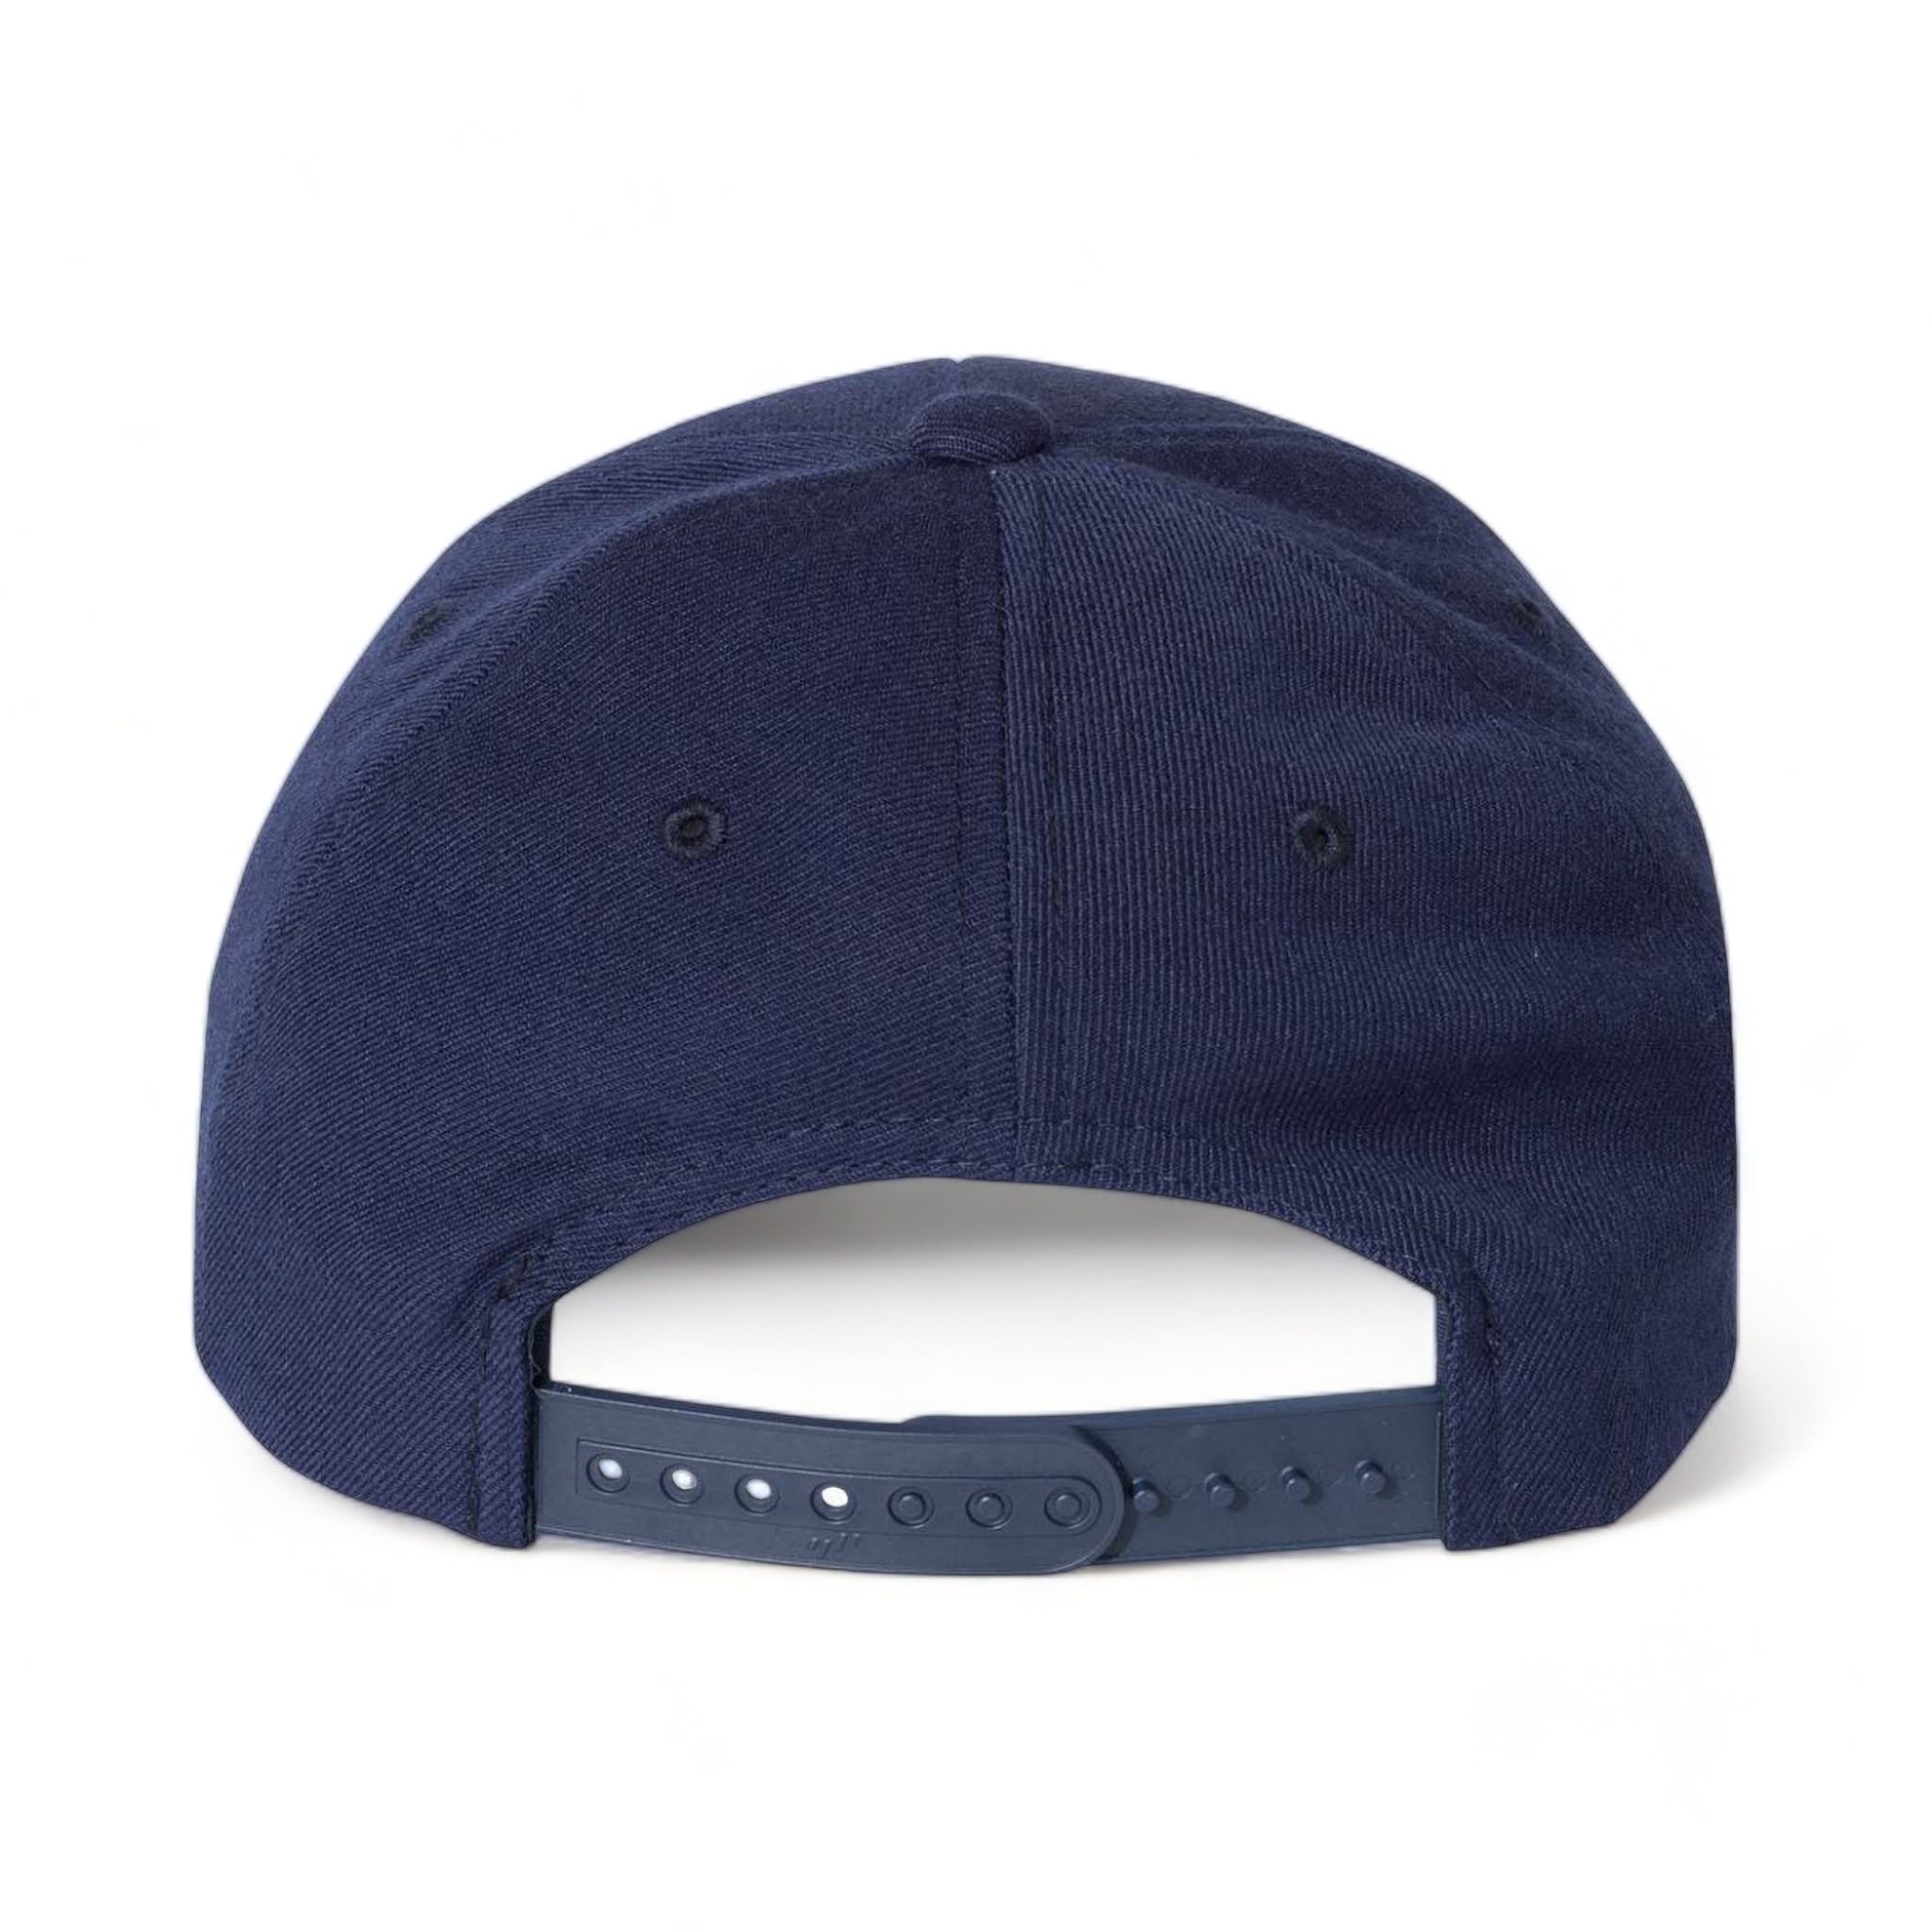 Back view of YP Classics 6789M custom hat in navy